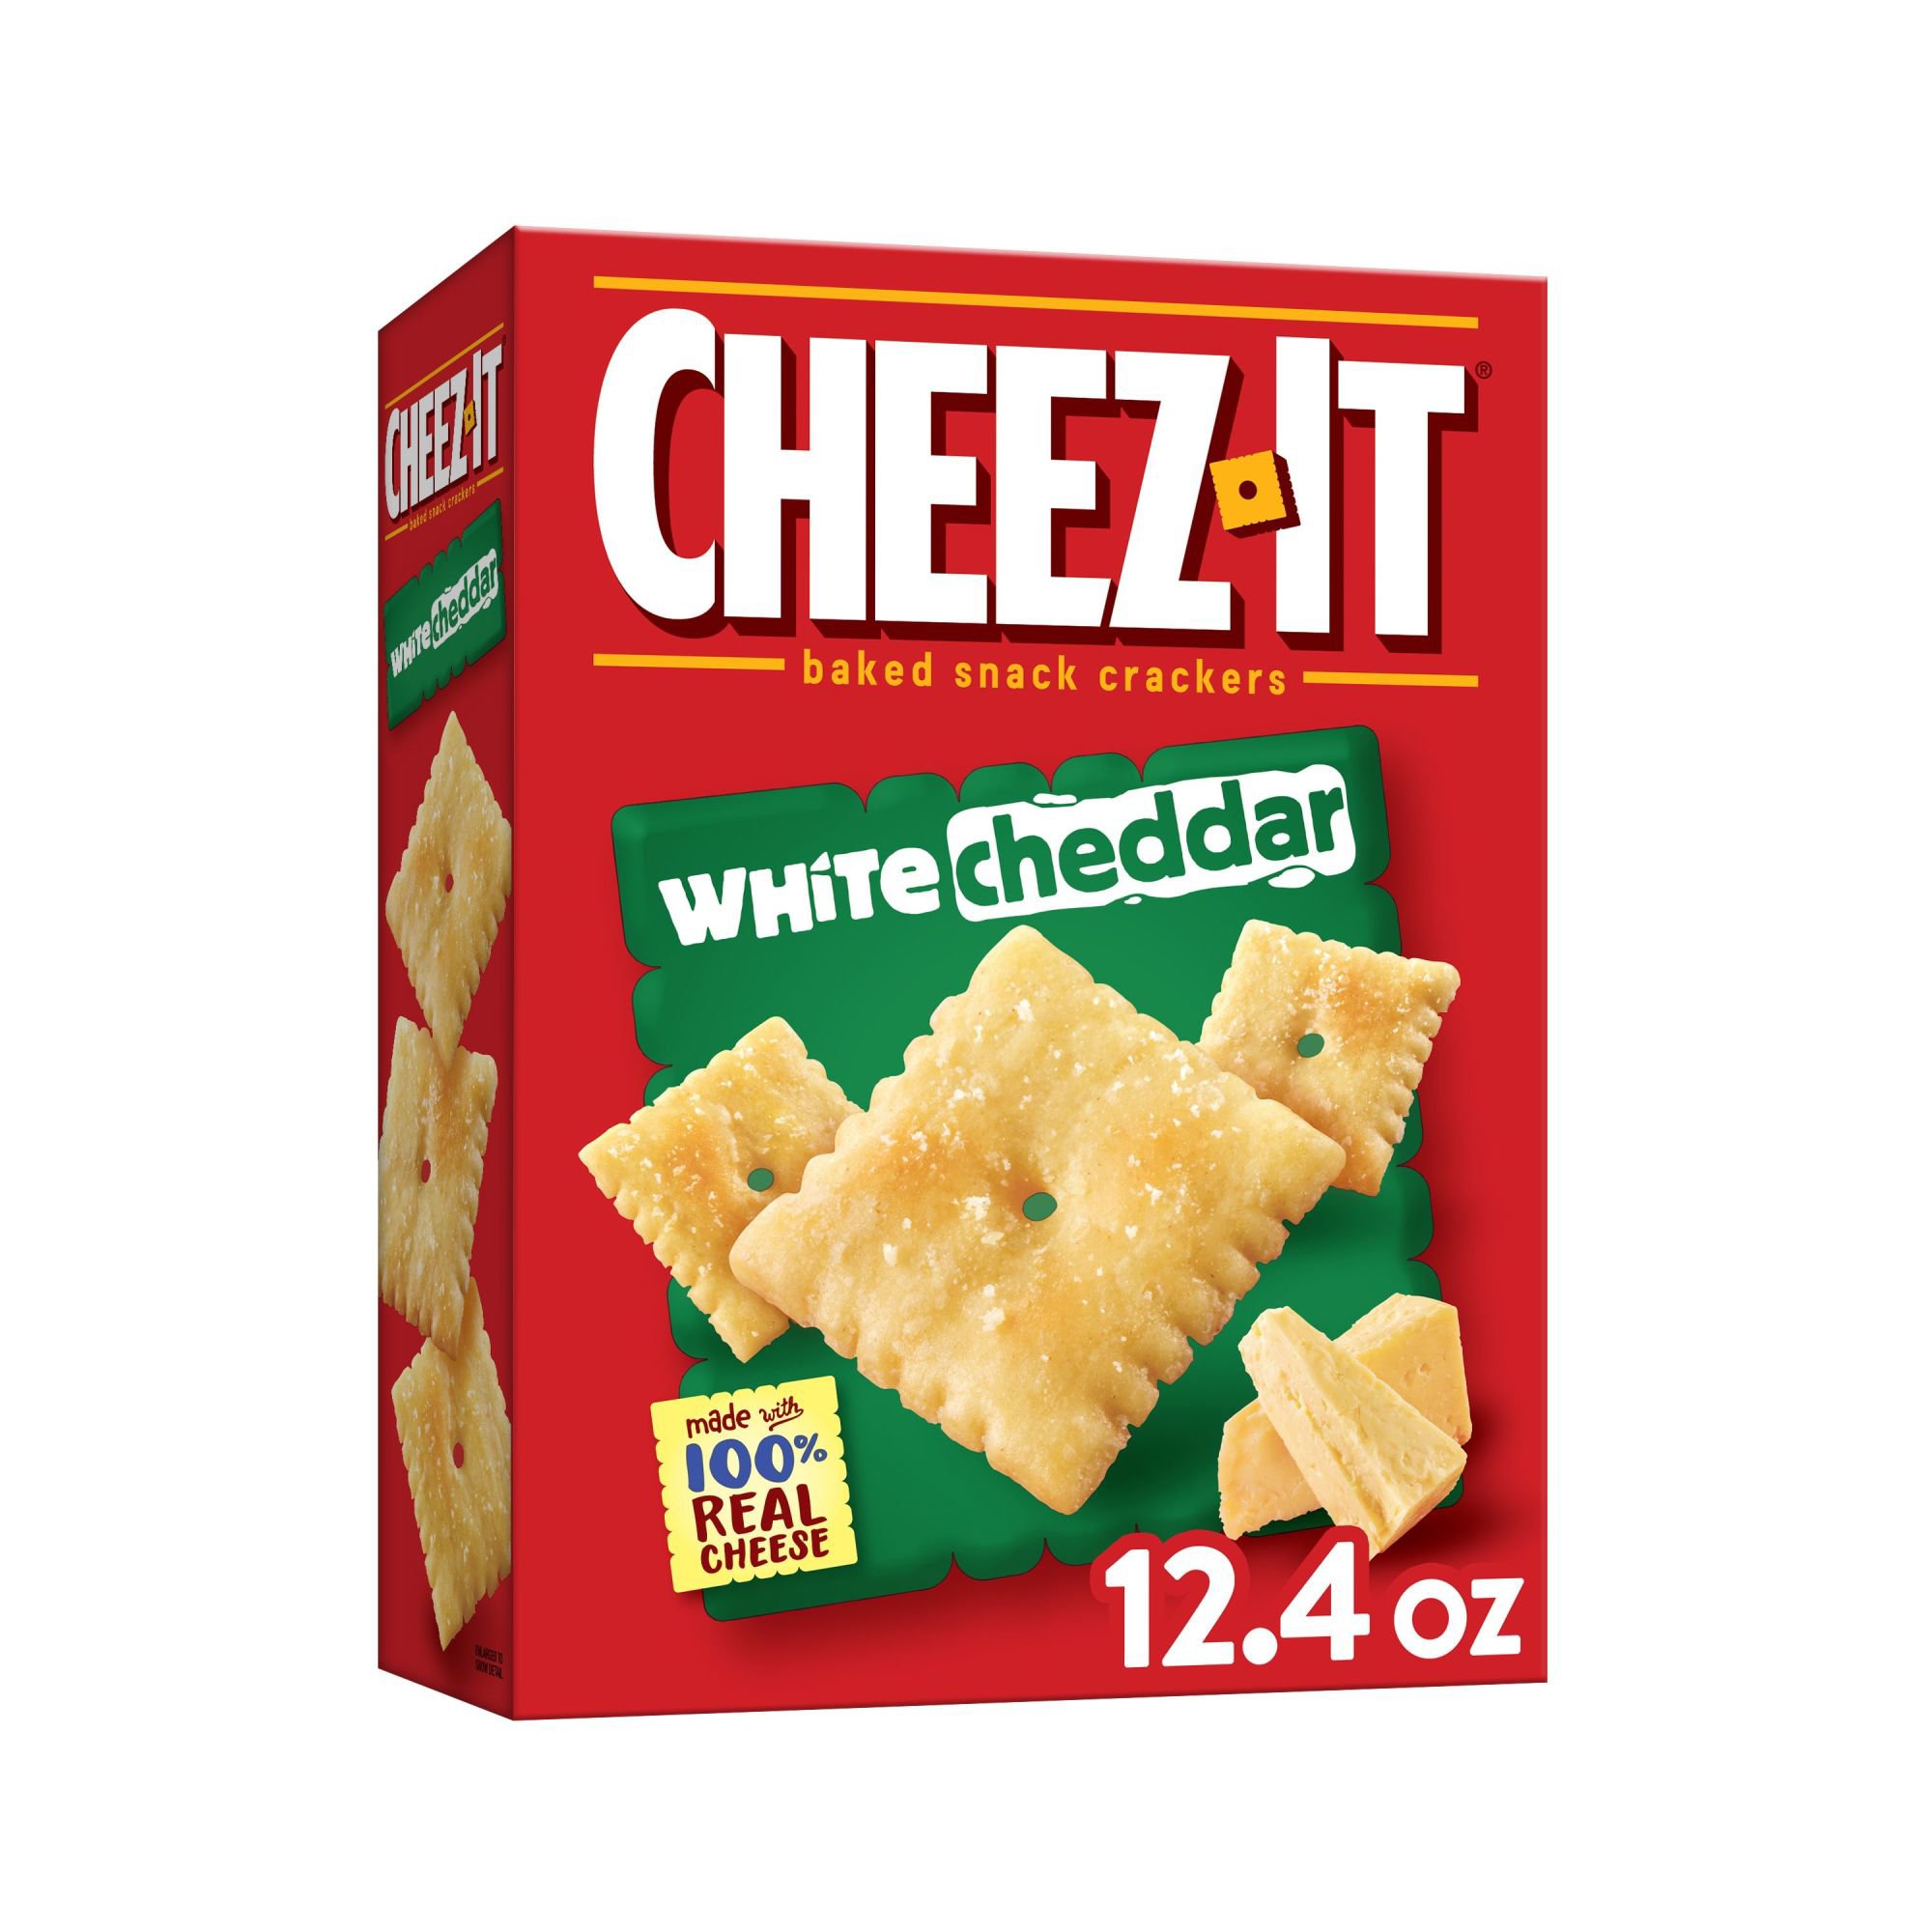 Sunshine Cheez It White Cheddar Baked Snack Crackers Shop